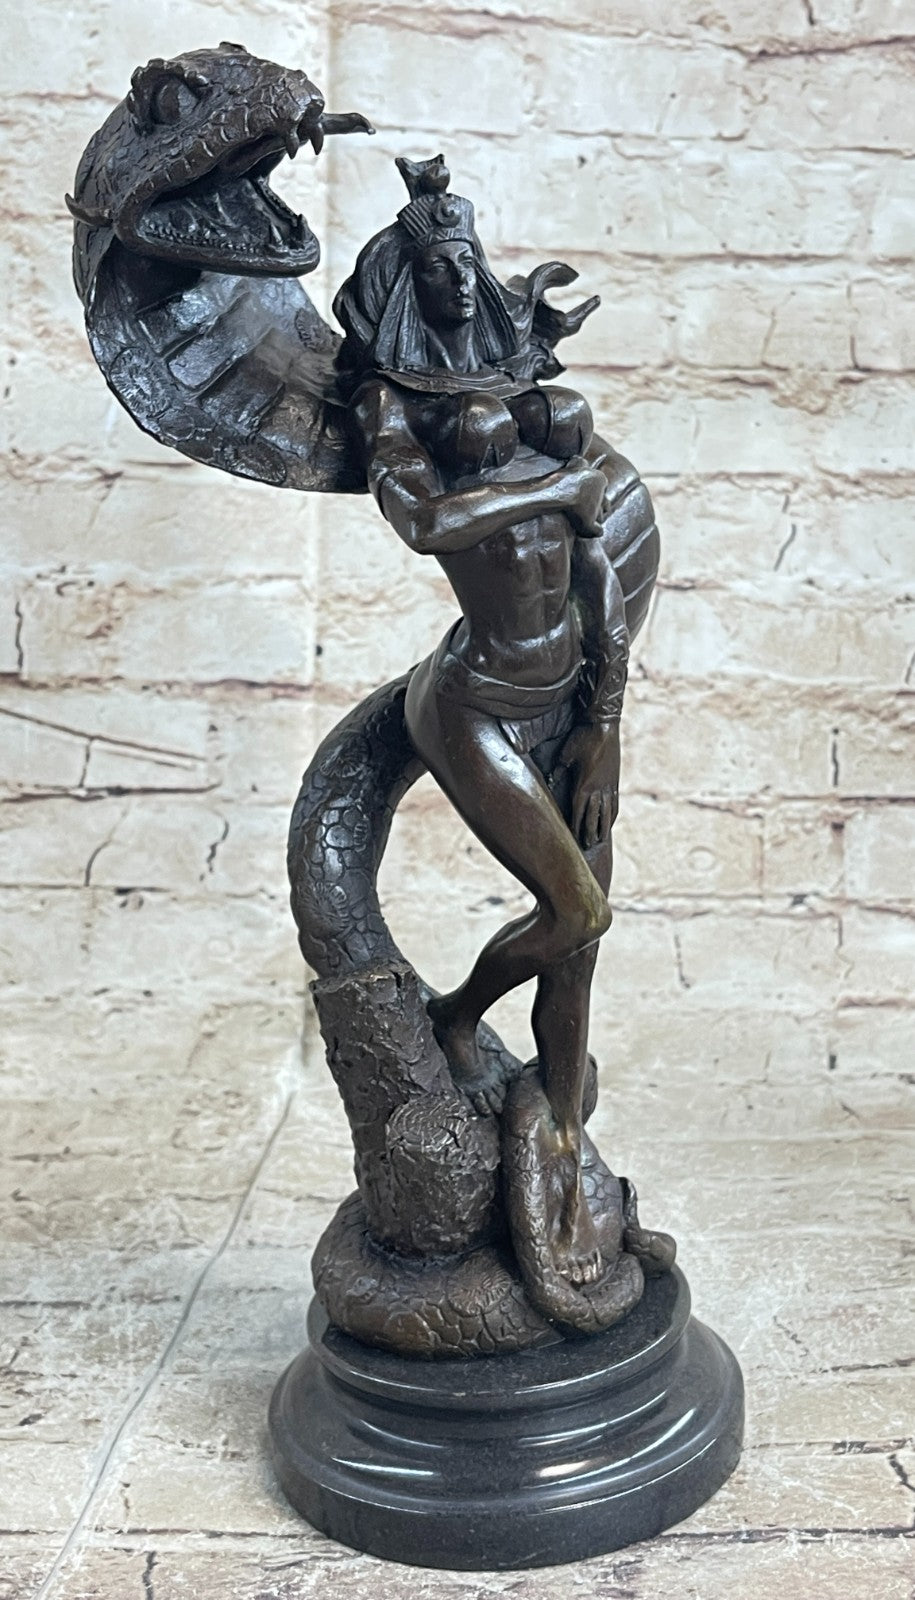 Handmade Bronze Figure - Girl with Whip- sign. Preiss Nude Naked Sculpture  Sale